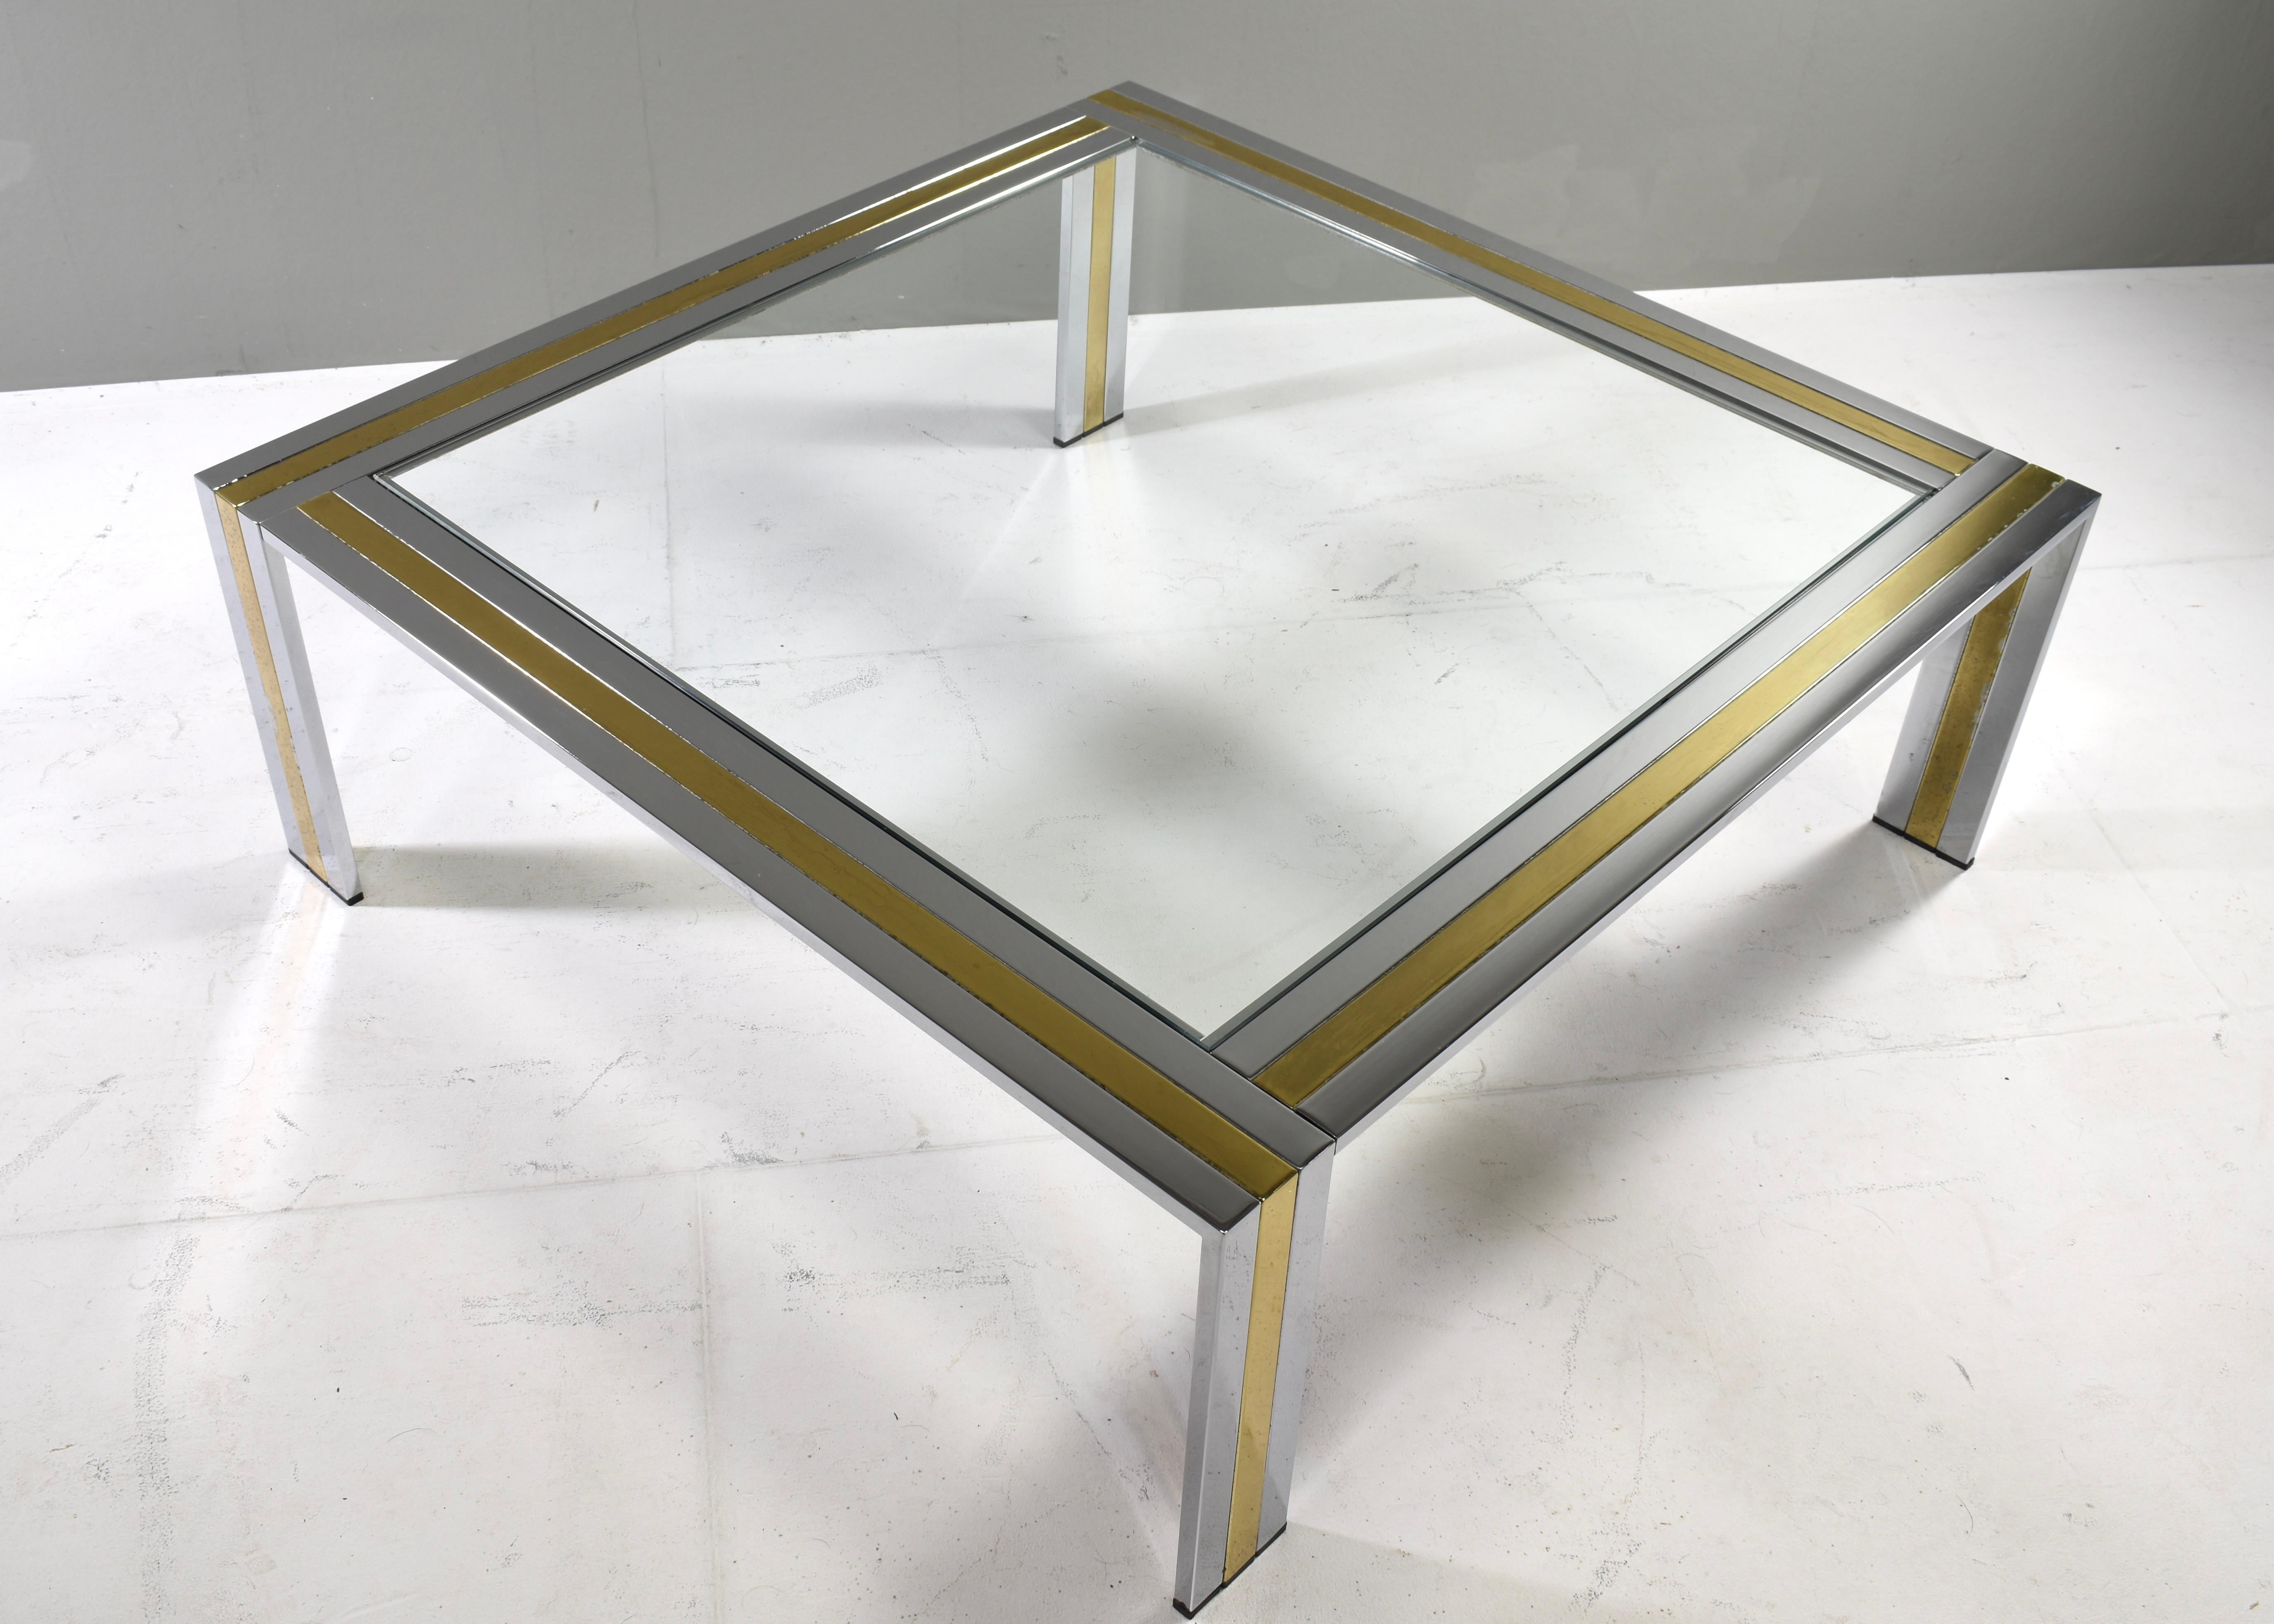 Renato Zevi square coffee table in chrome, brassed metal and clear glass, Italy – circa 1970.
The table is in good condition with signs of age, use and patina. The chrome is overall in very good condition. The brass has in some places more signs of